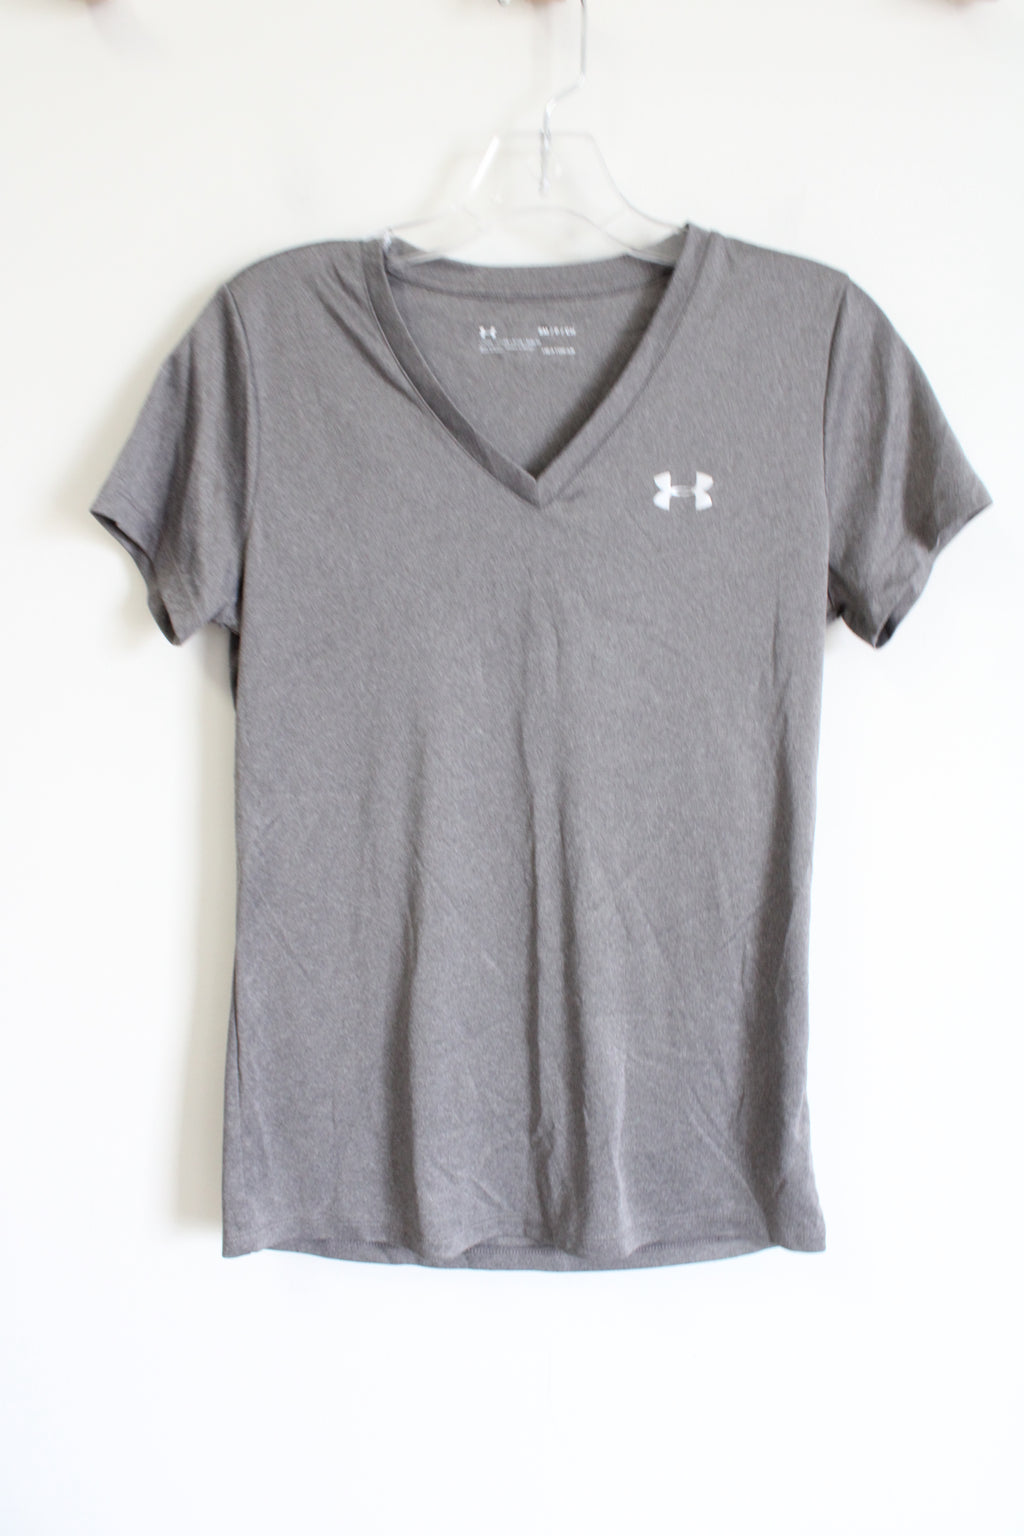 Under Armour Gray V-Neck Athletic Top | S